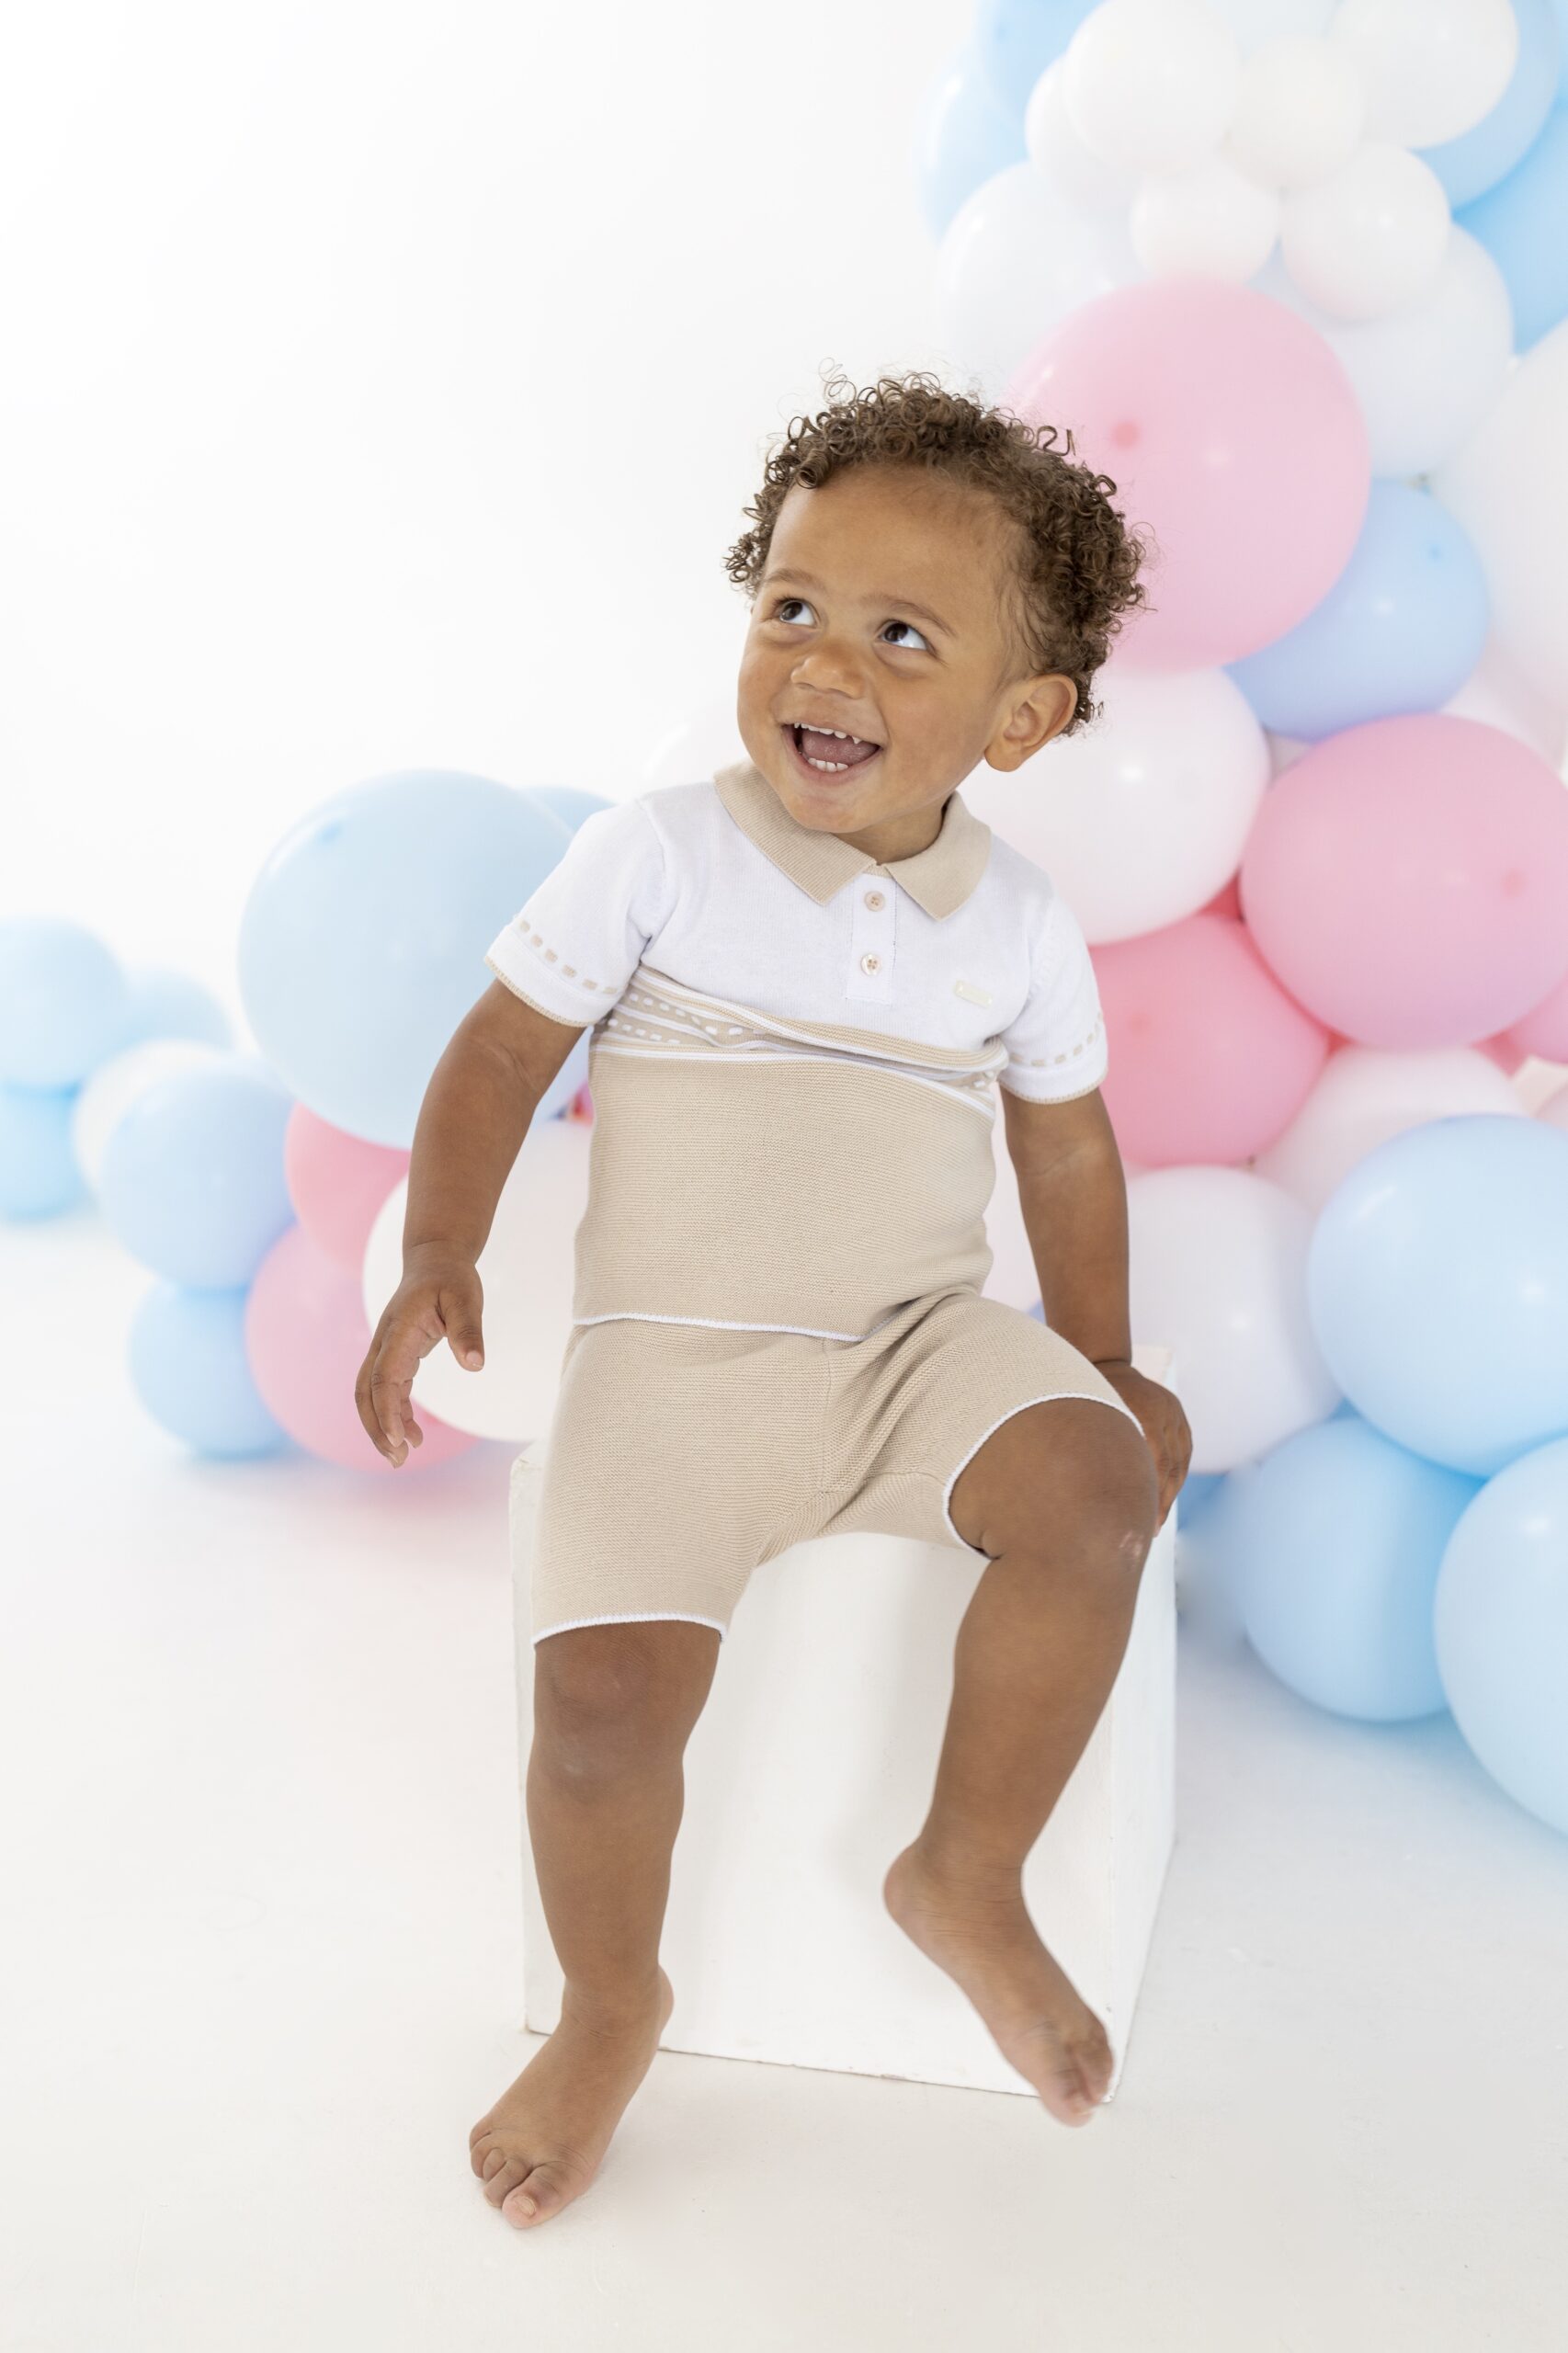 Blues Baby Beige & White Knitted Polo Short Set